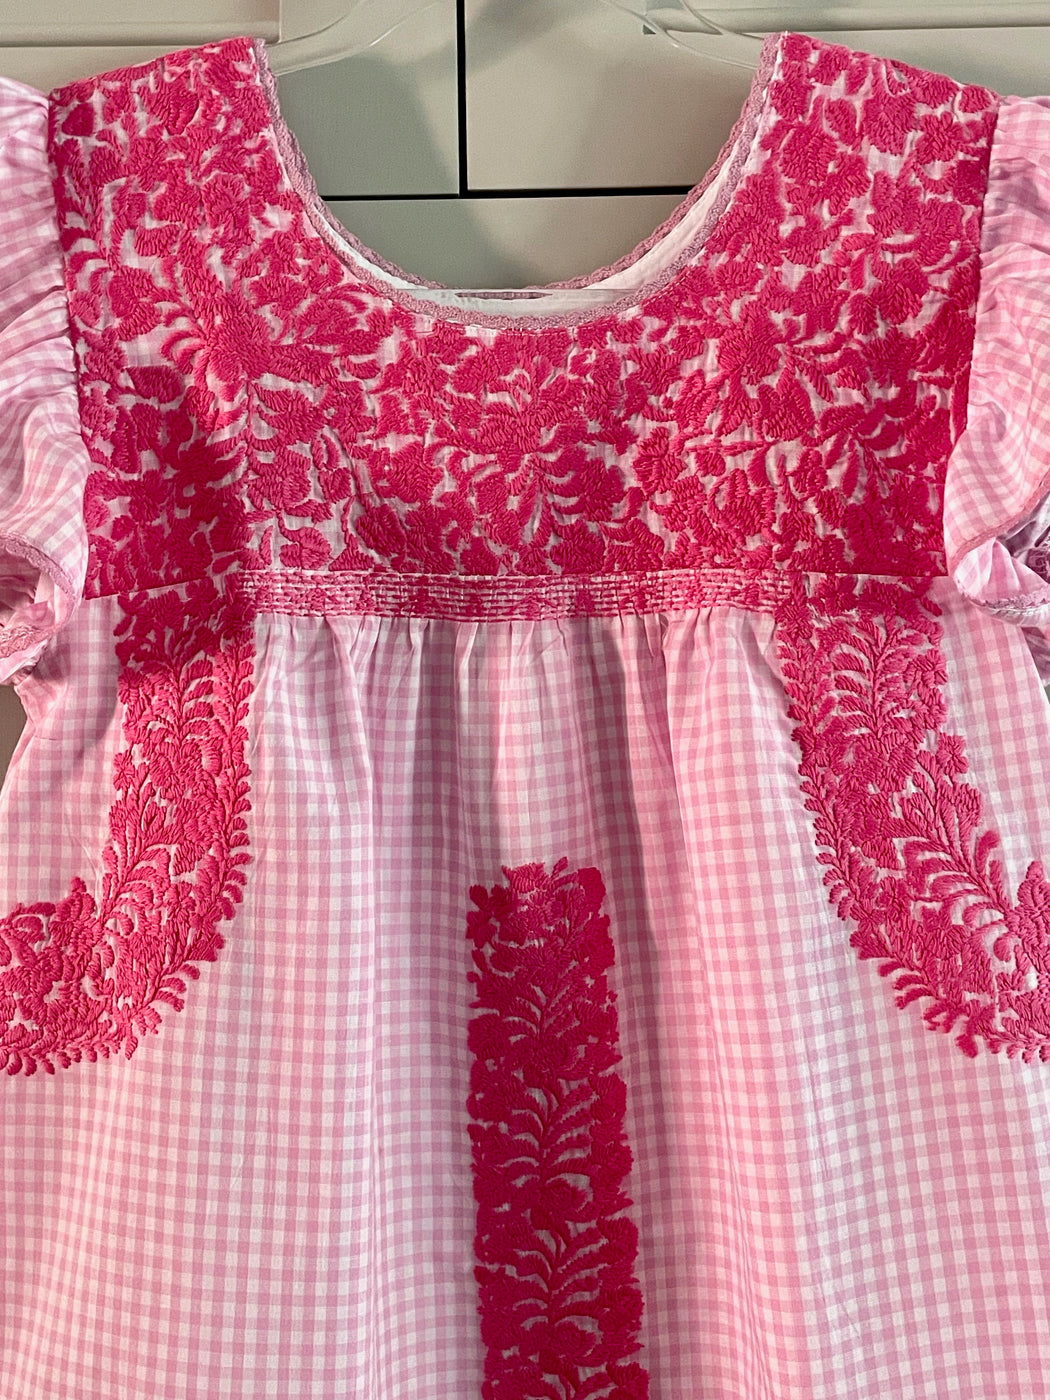 Hand-Embroidered Mexican Blouse - Pink Gingham